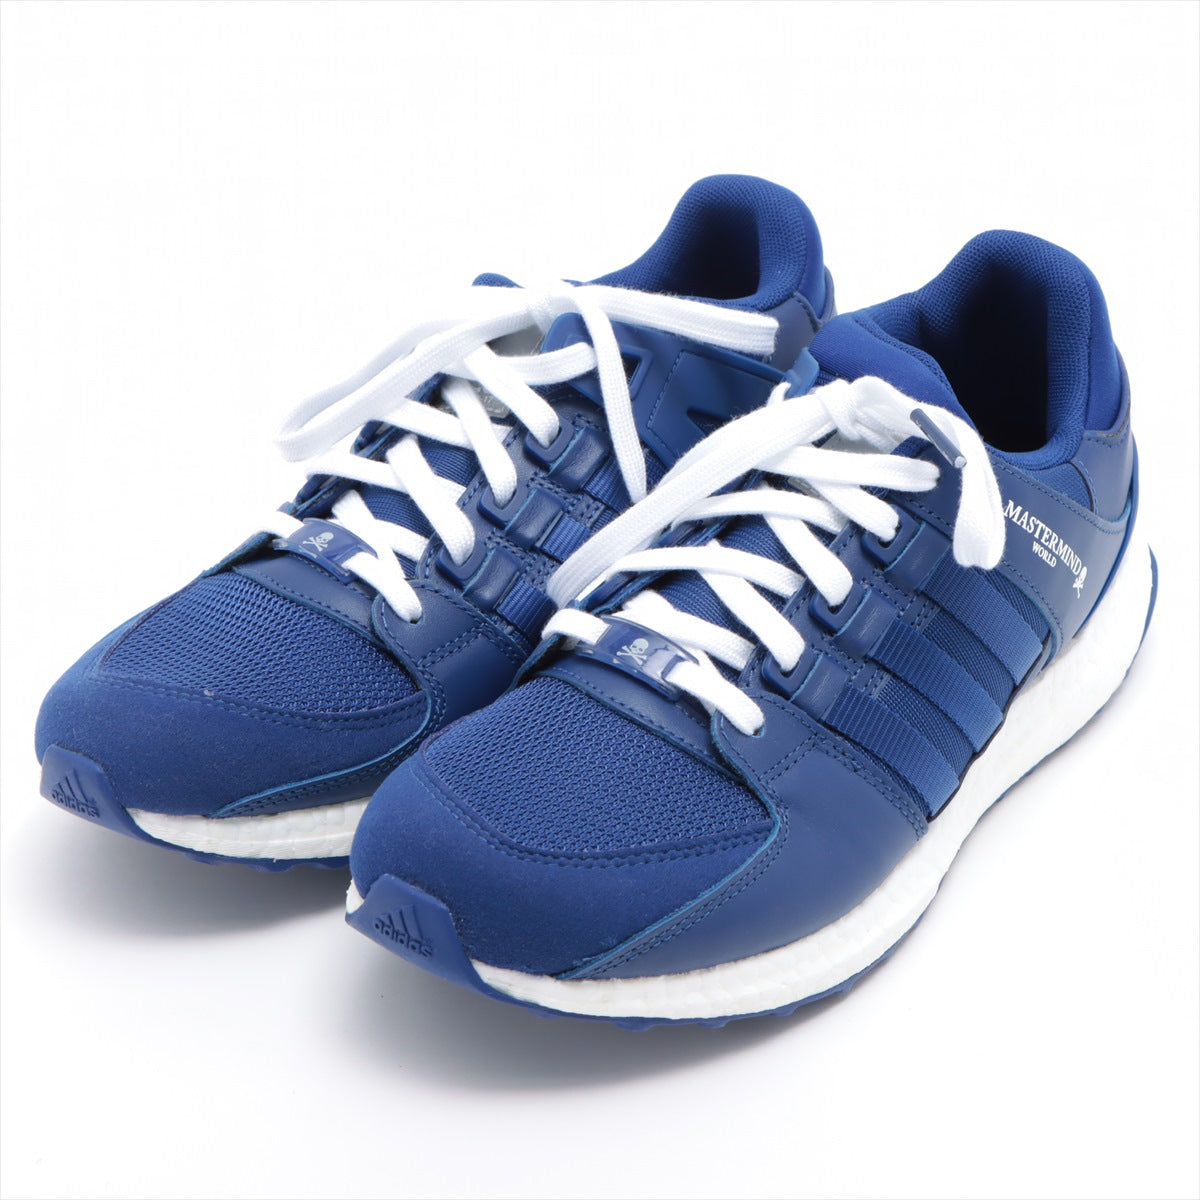 adidas x master mind Mesh x leather Sneakers 27.0cm Men's Blue CQ1827